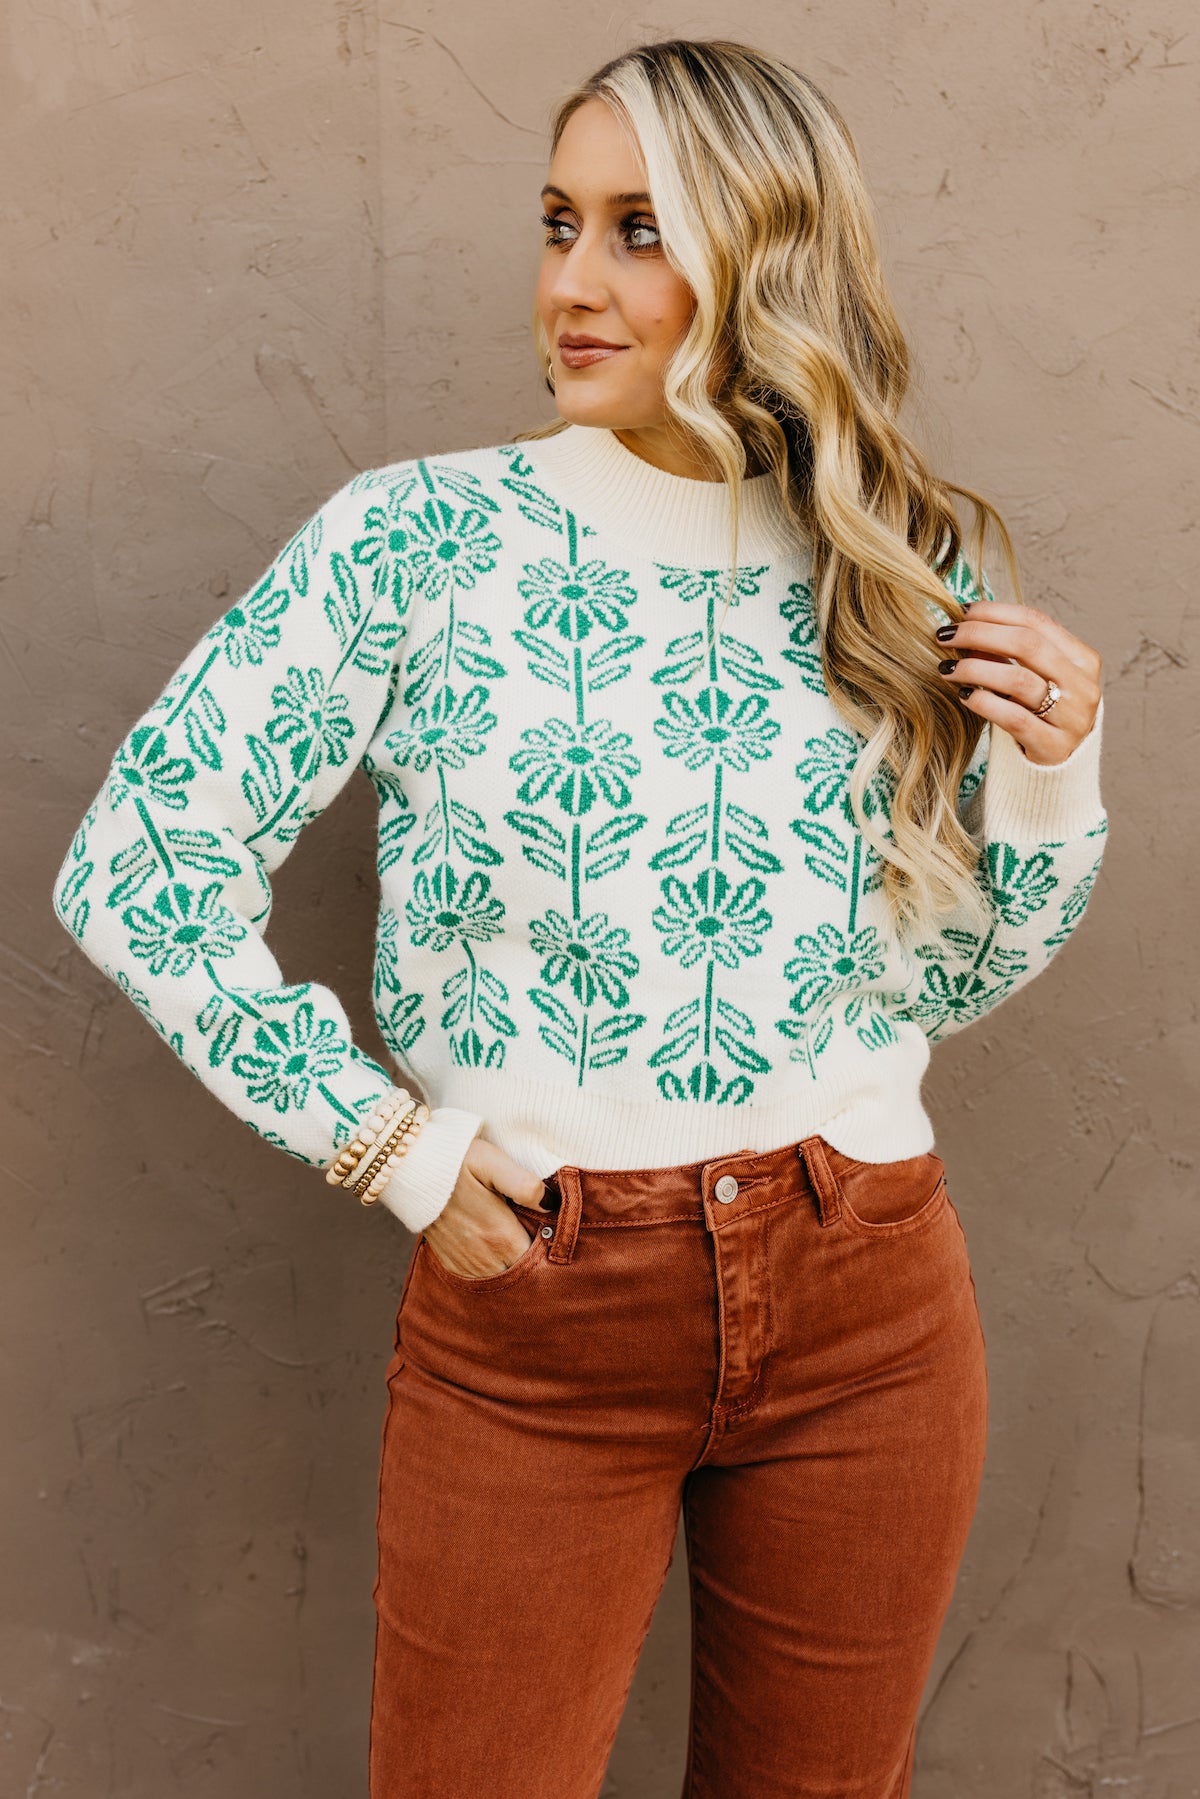 The Callan Floral Pattern Sweater